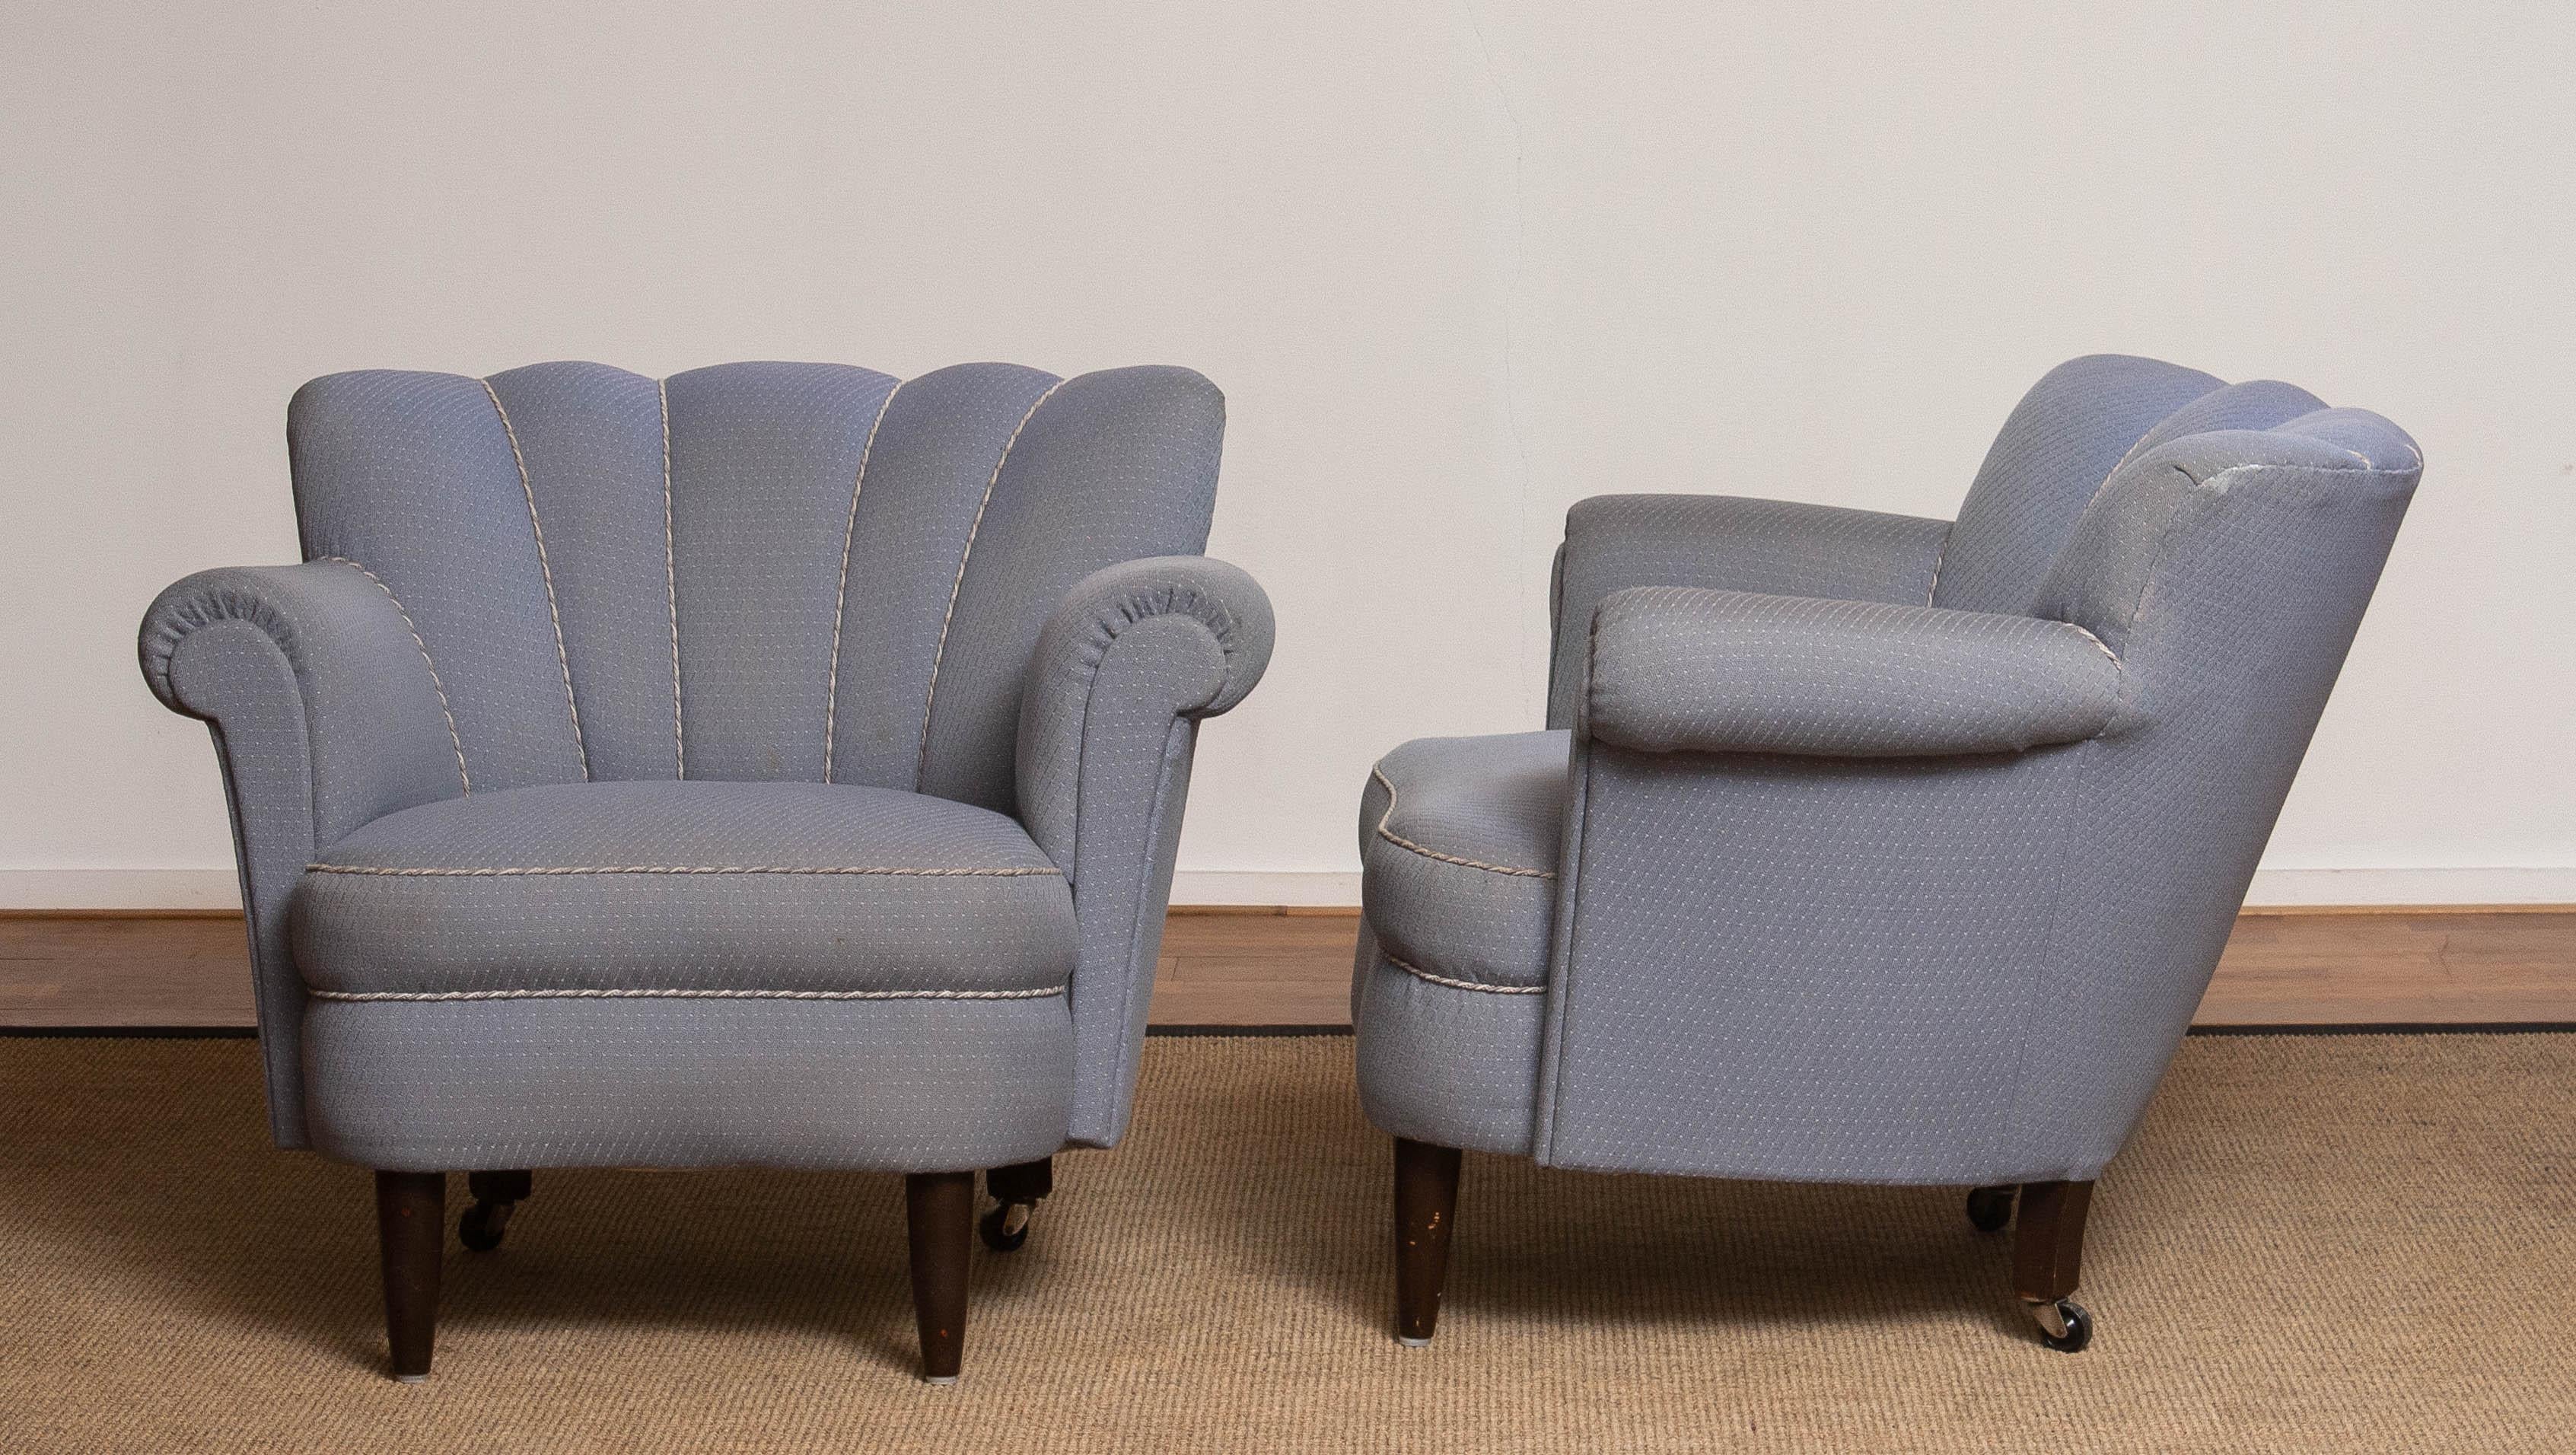 Hollywood Regency 1940s Pair Carl-Johan Boman Attributed Shell Back Chairs for Re-Upholstery